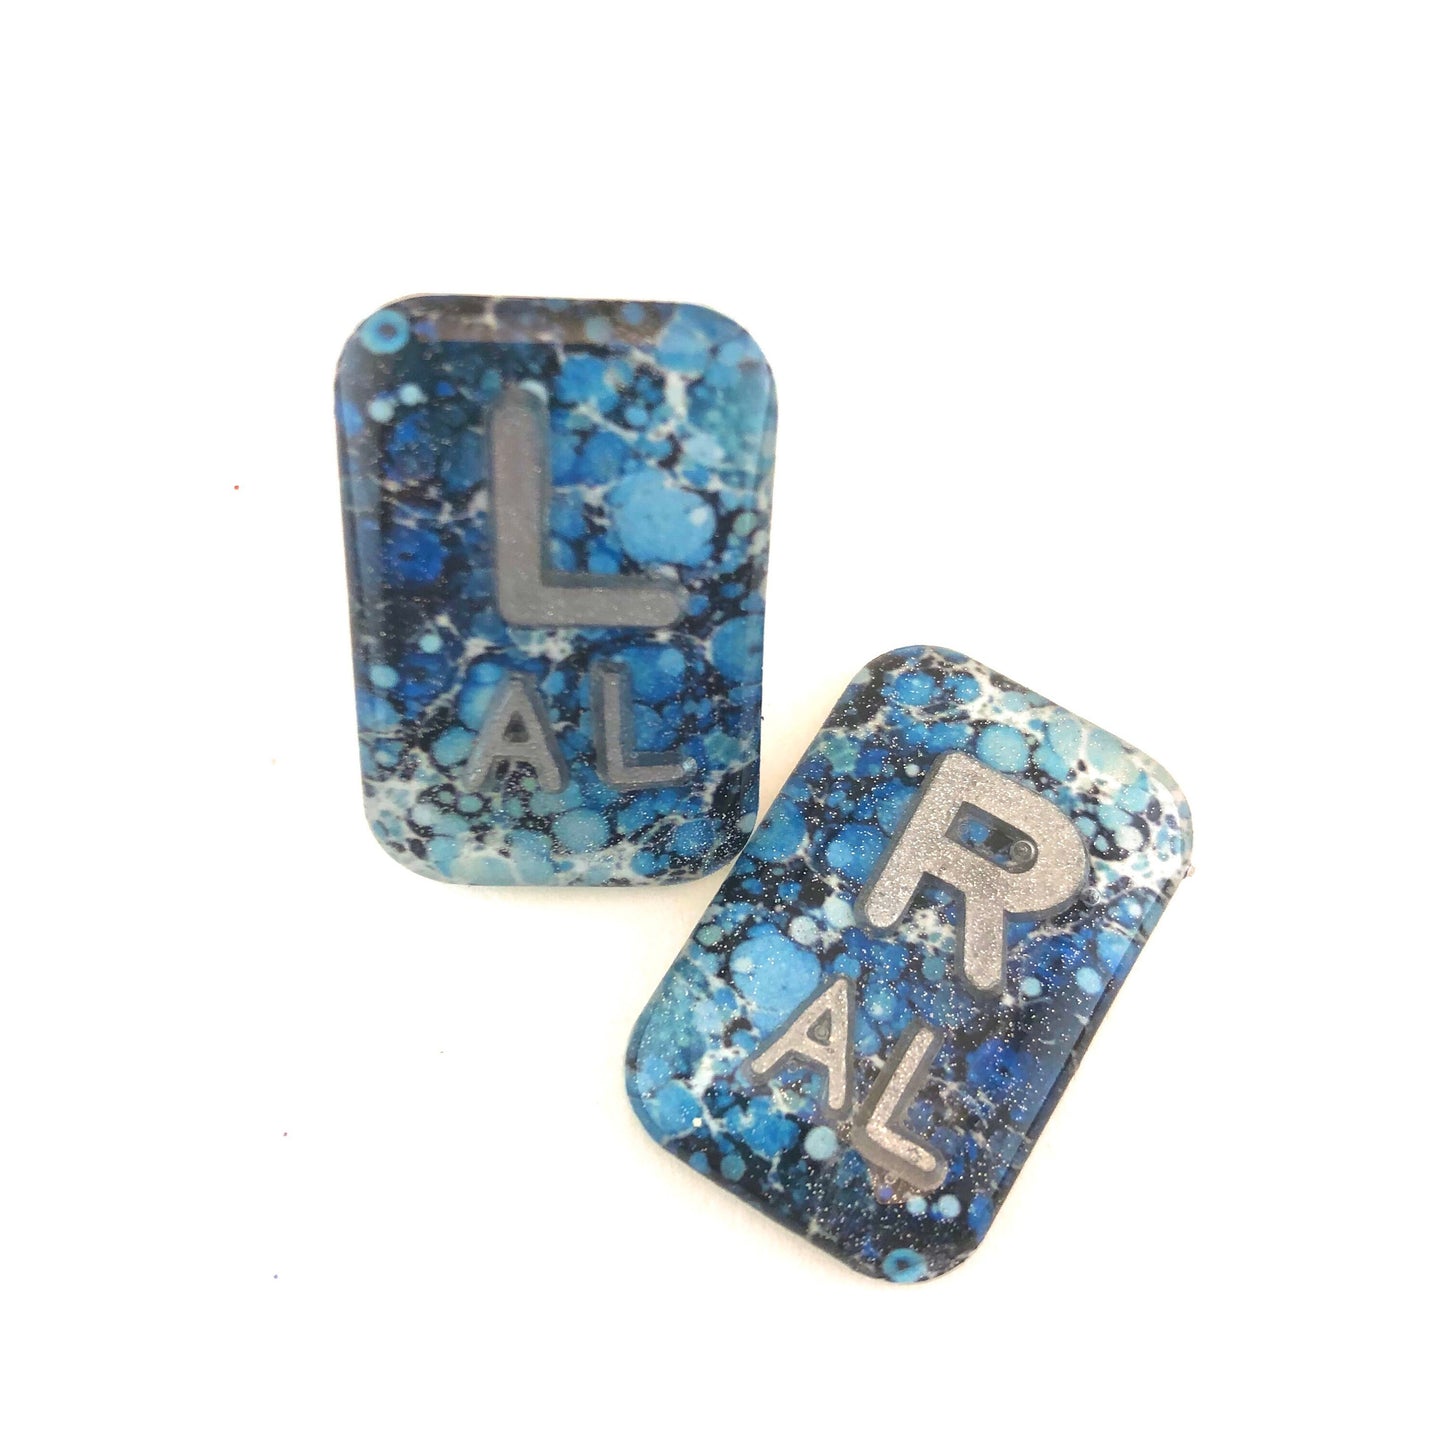 Marbled  Ocean Xray Markers Customized with Lead Initials